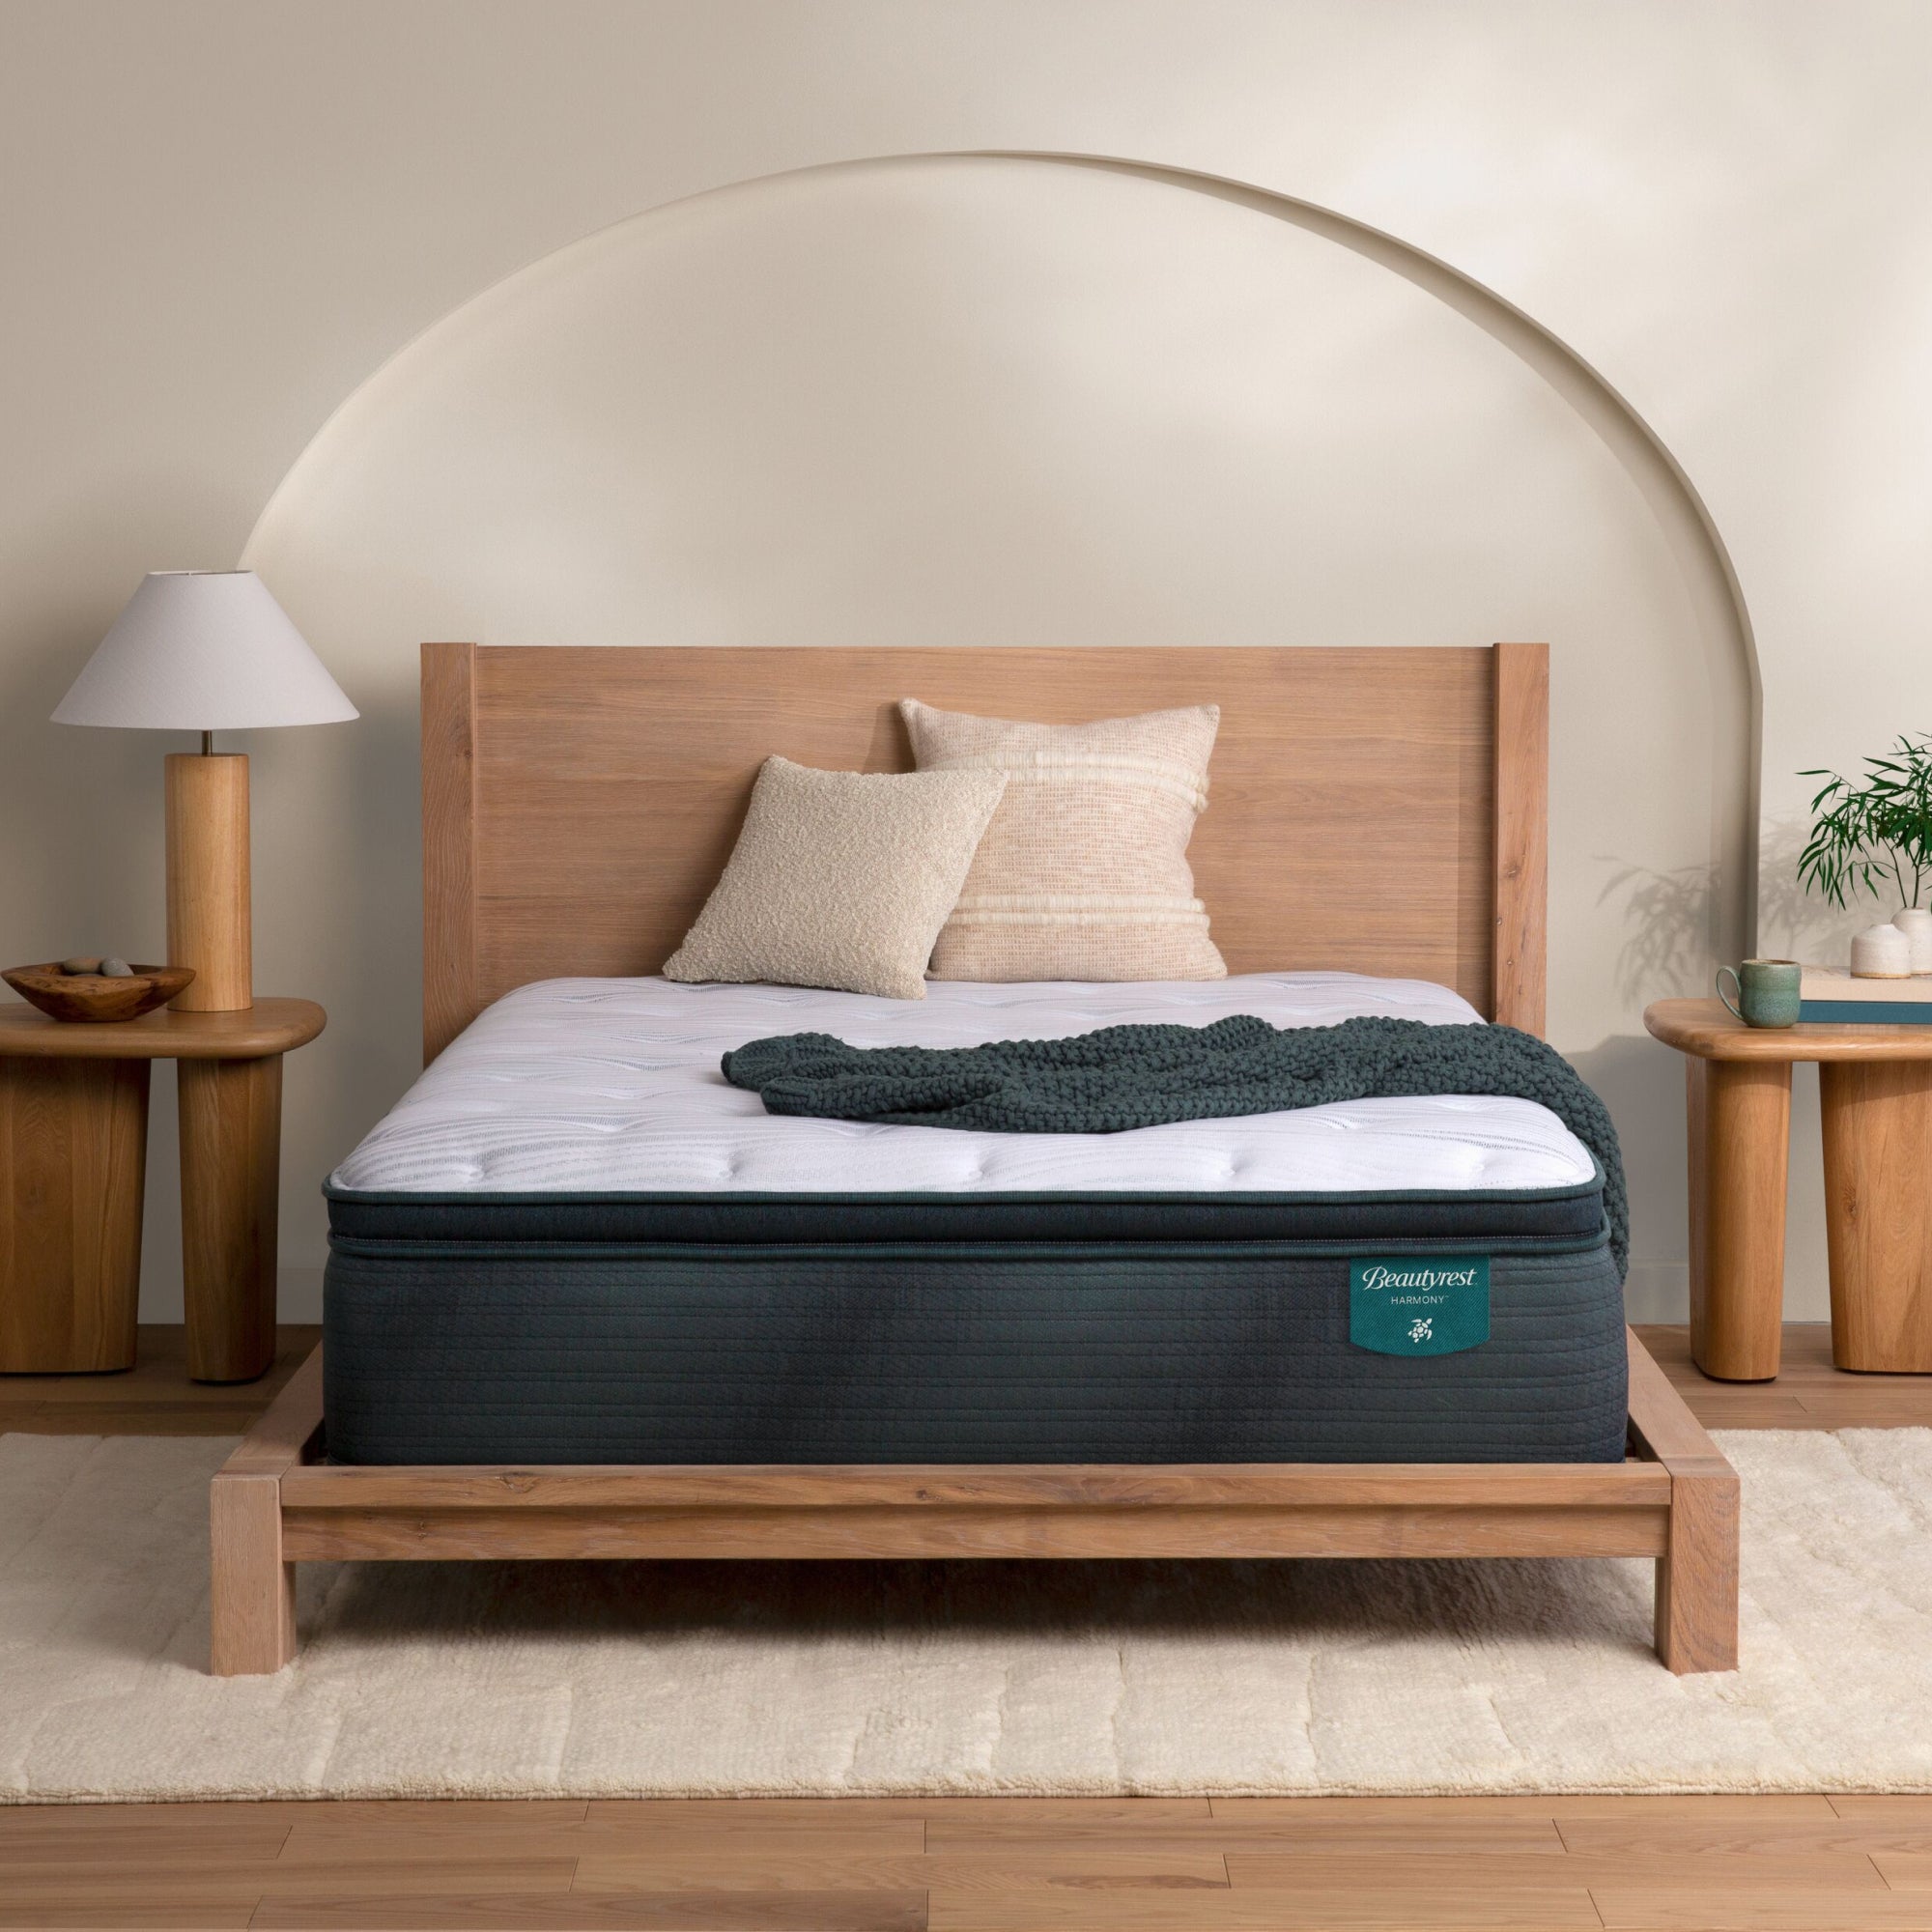 The Beautyrest Harmony plush pillow top mattress in a bedroom on a wooden bed|| series: Exceptional Cypress Bay || feel: plush pillow top